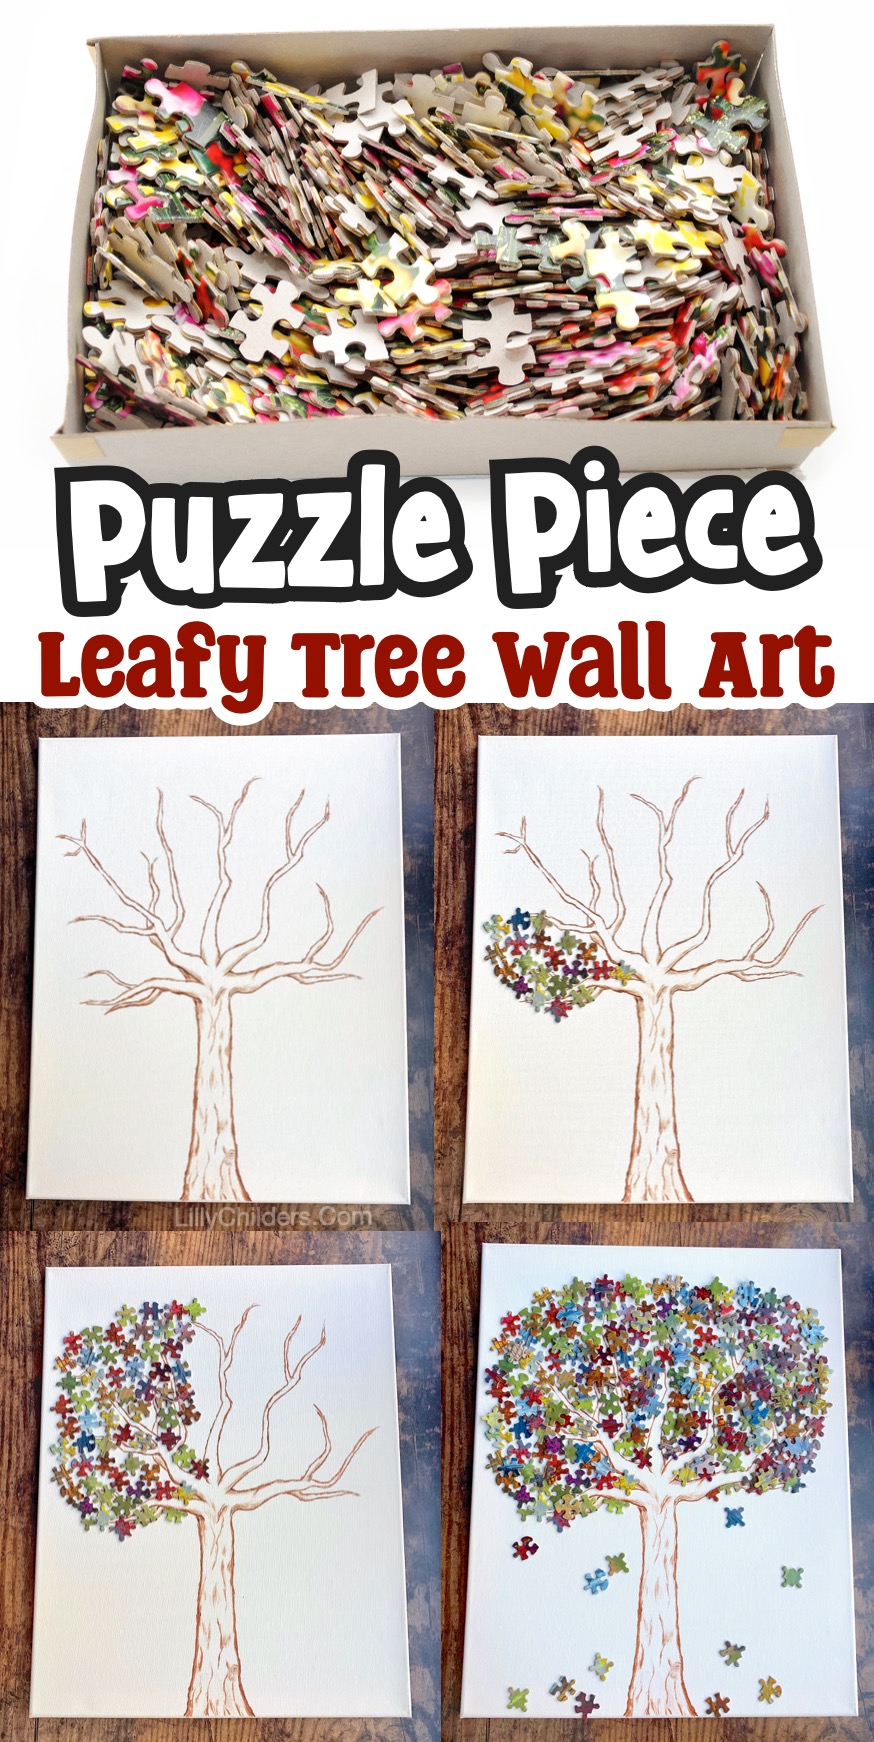 If you're looking for rainy day projects to make, this adult craft makes for beautiful DIY wall art! Simply glue puzzle pieces onto a canvas with a simple painting of a tree trunk.